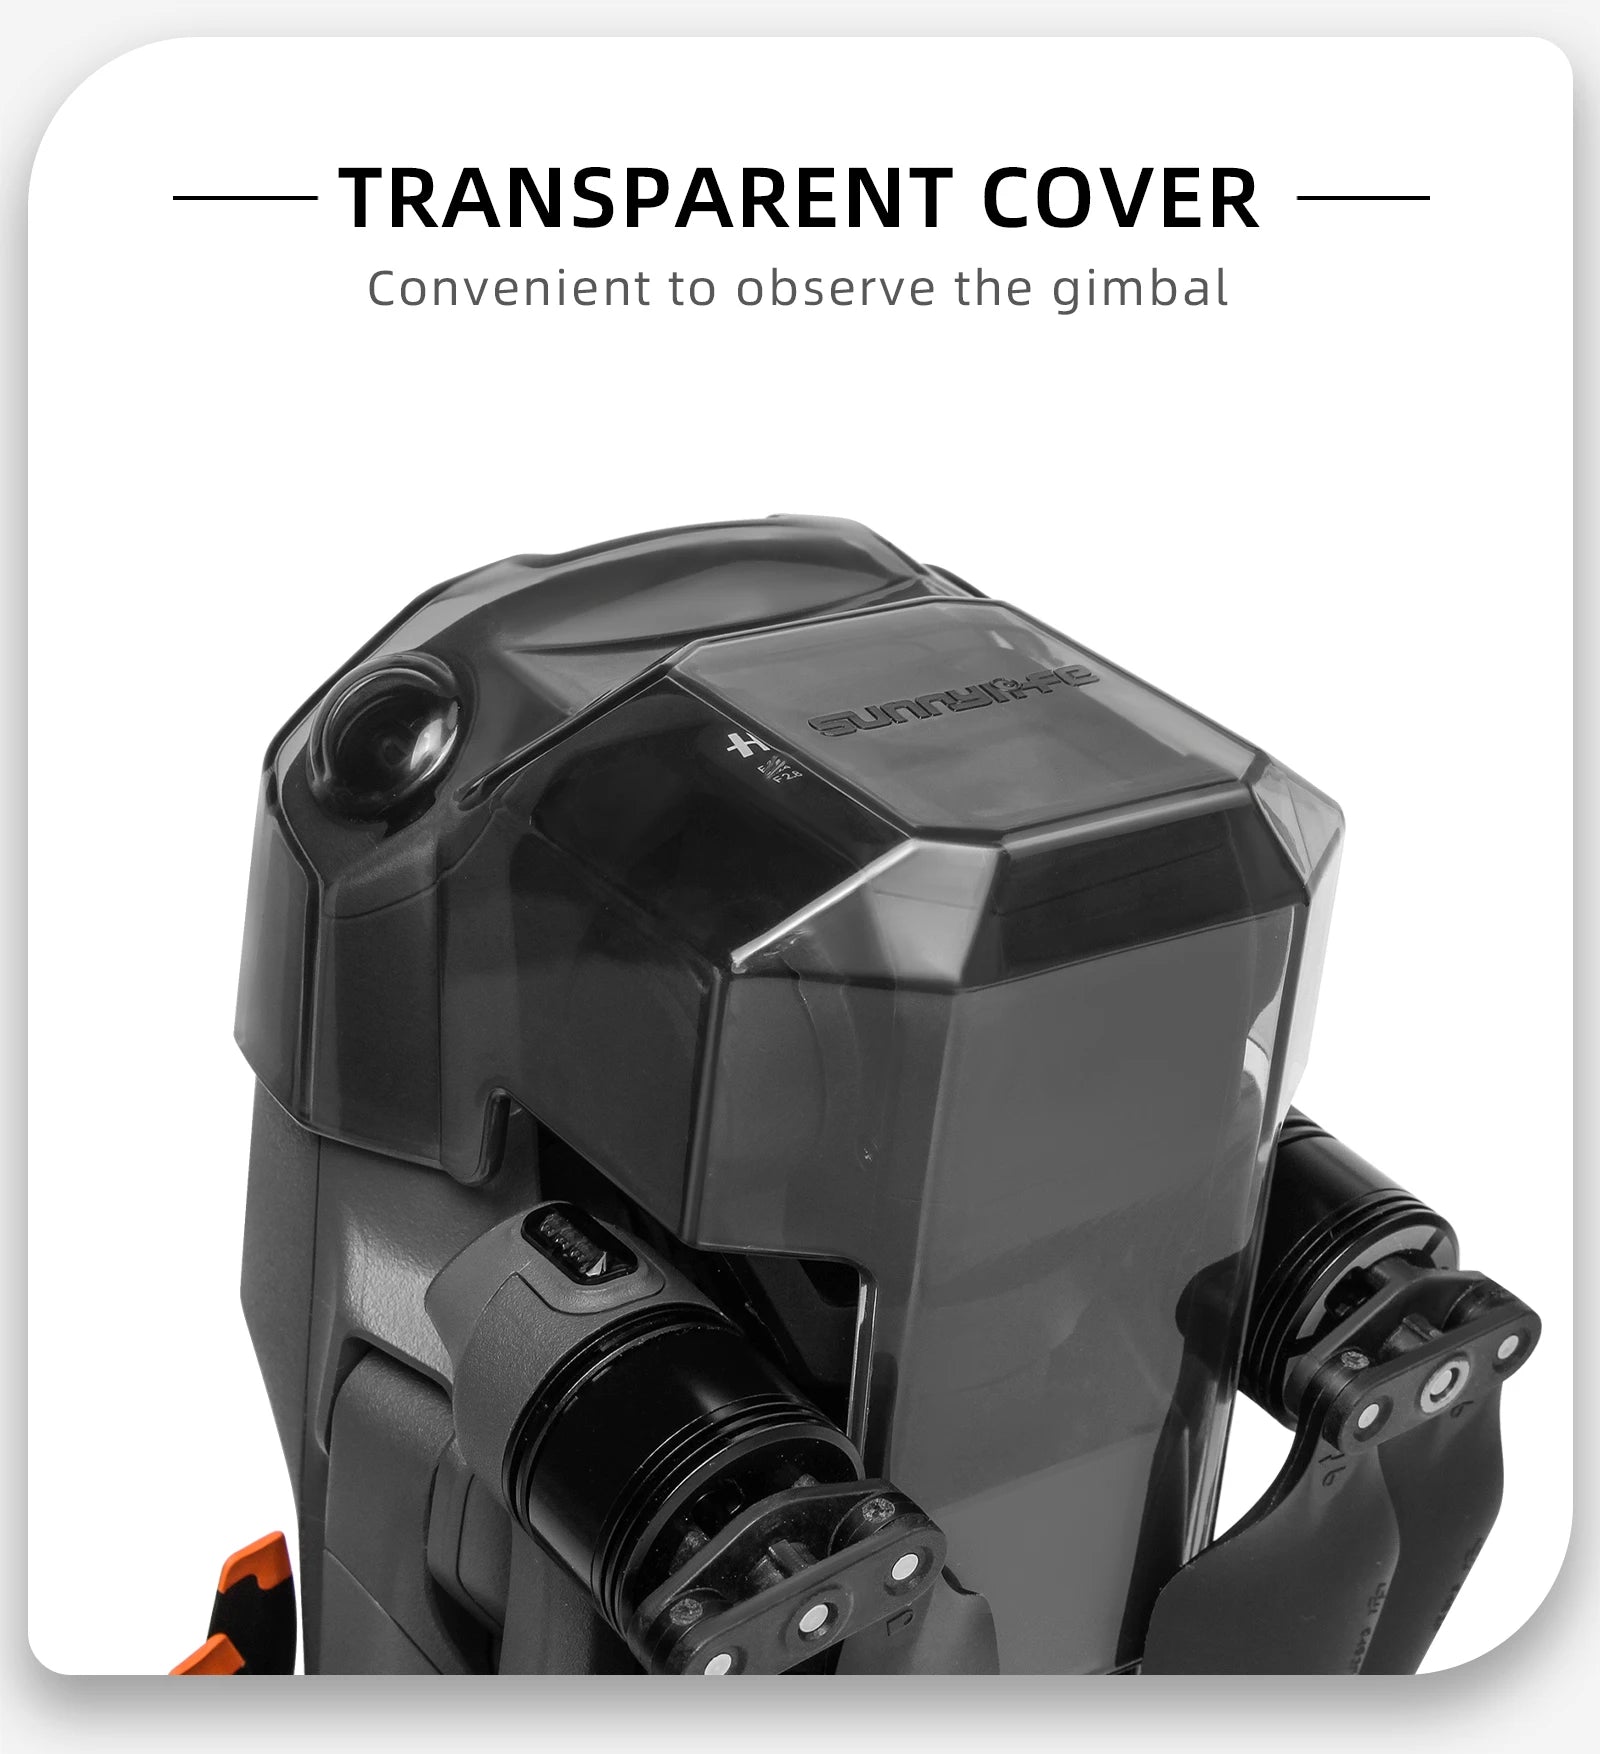 TRANSPARENT COVER Convenient to observe the gimbal  